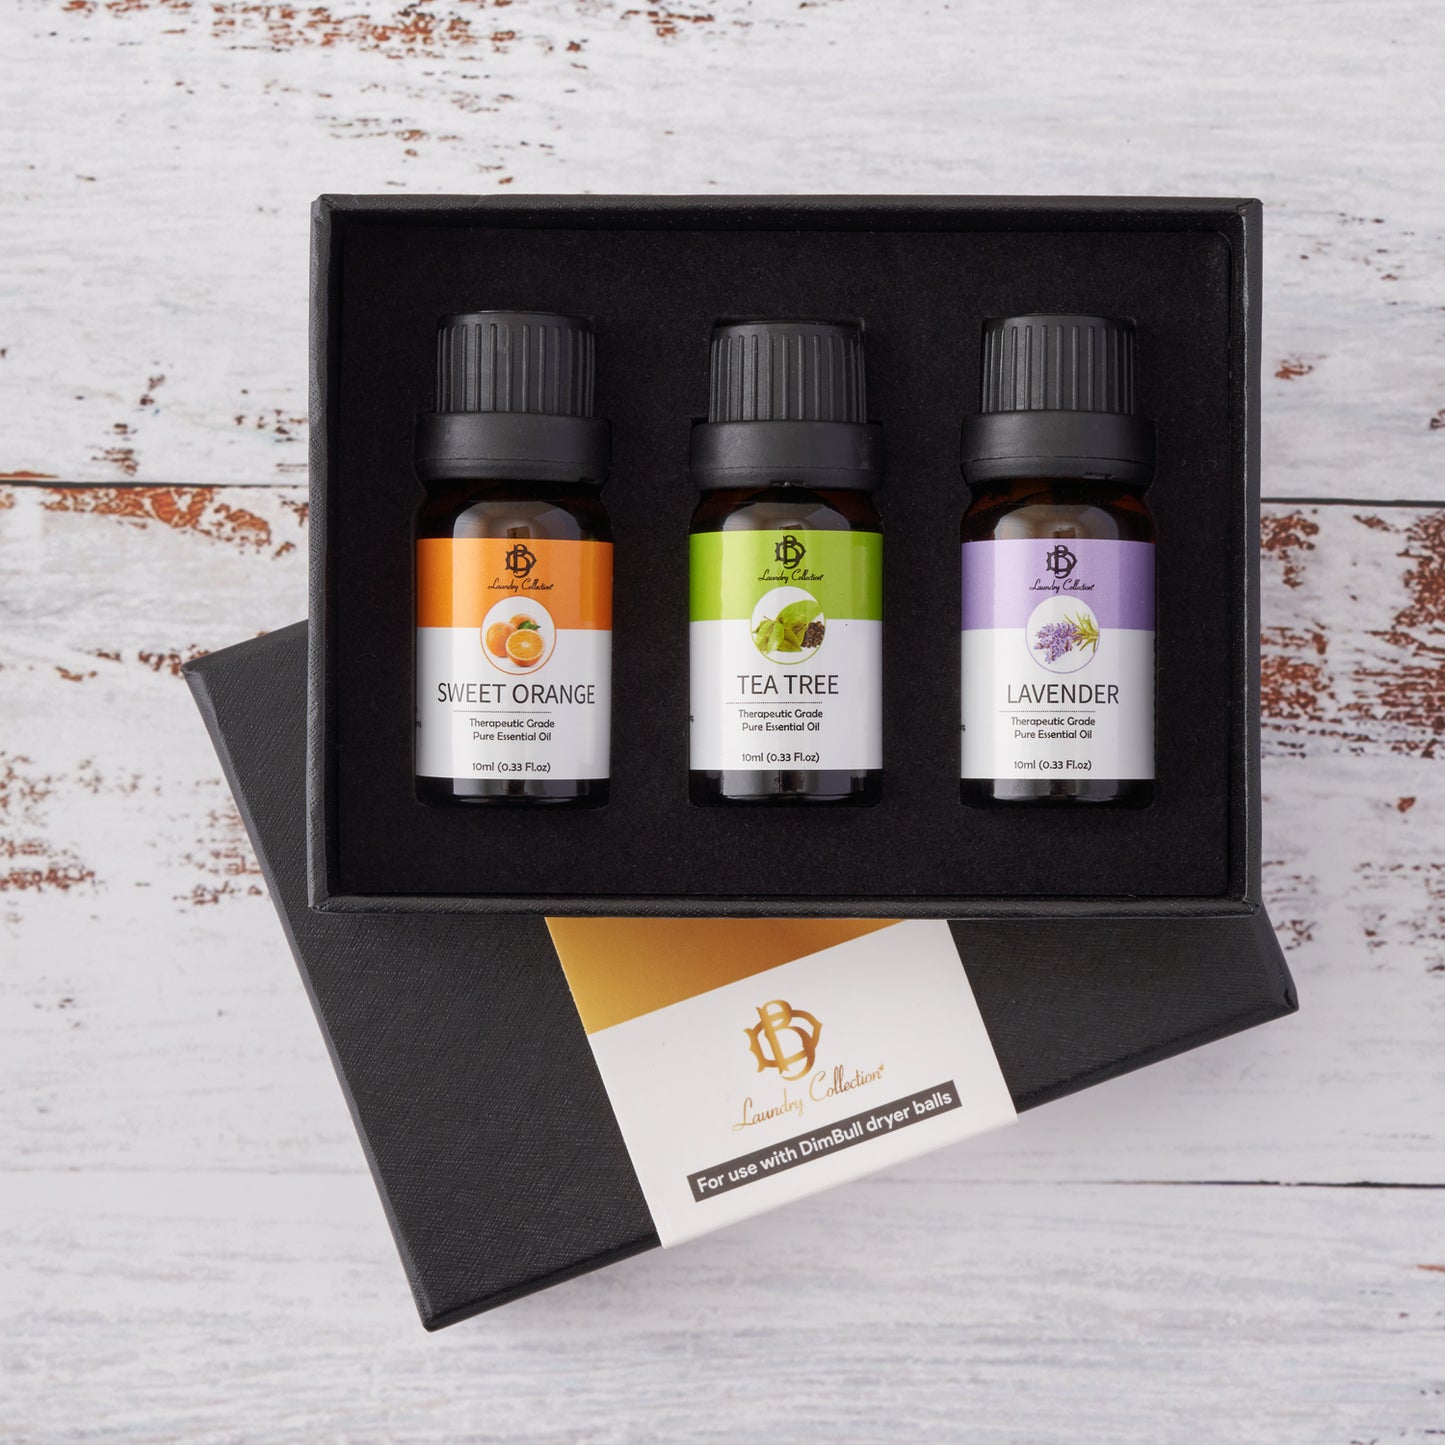 Laundry Collection Essential Oils Kit